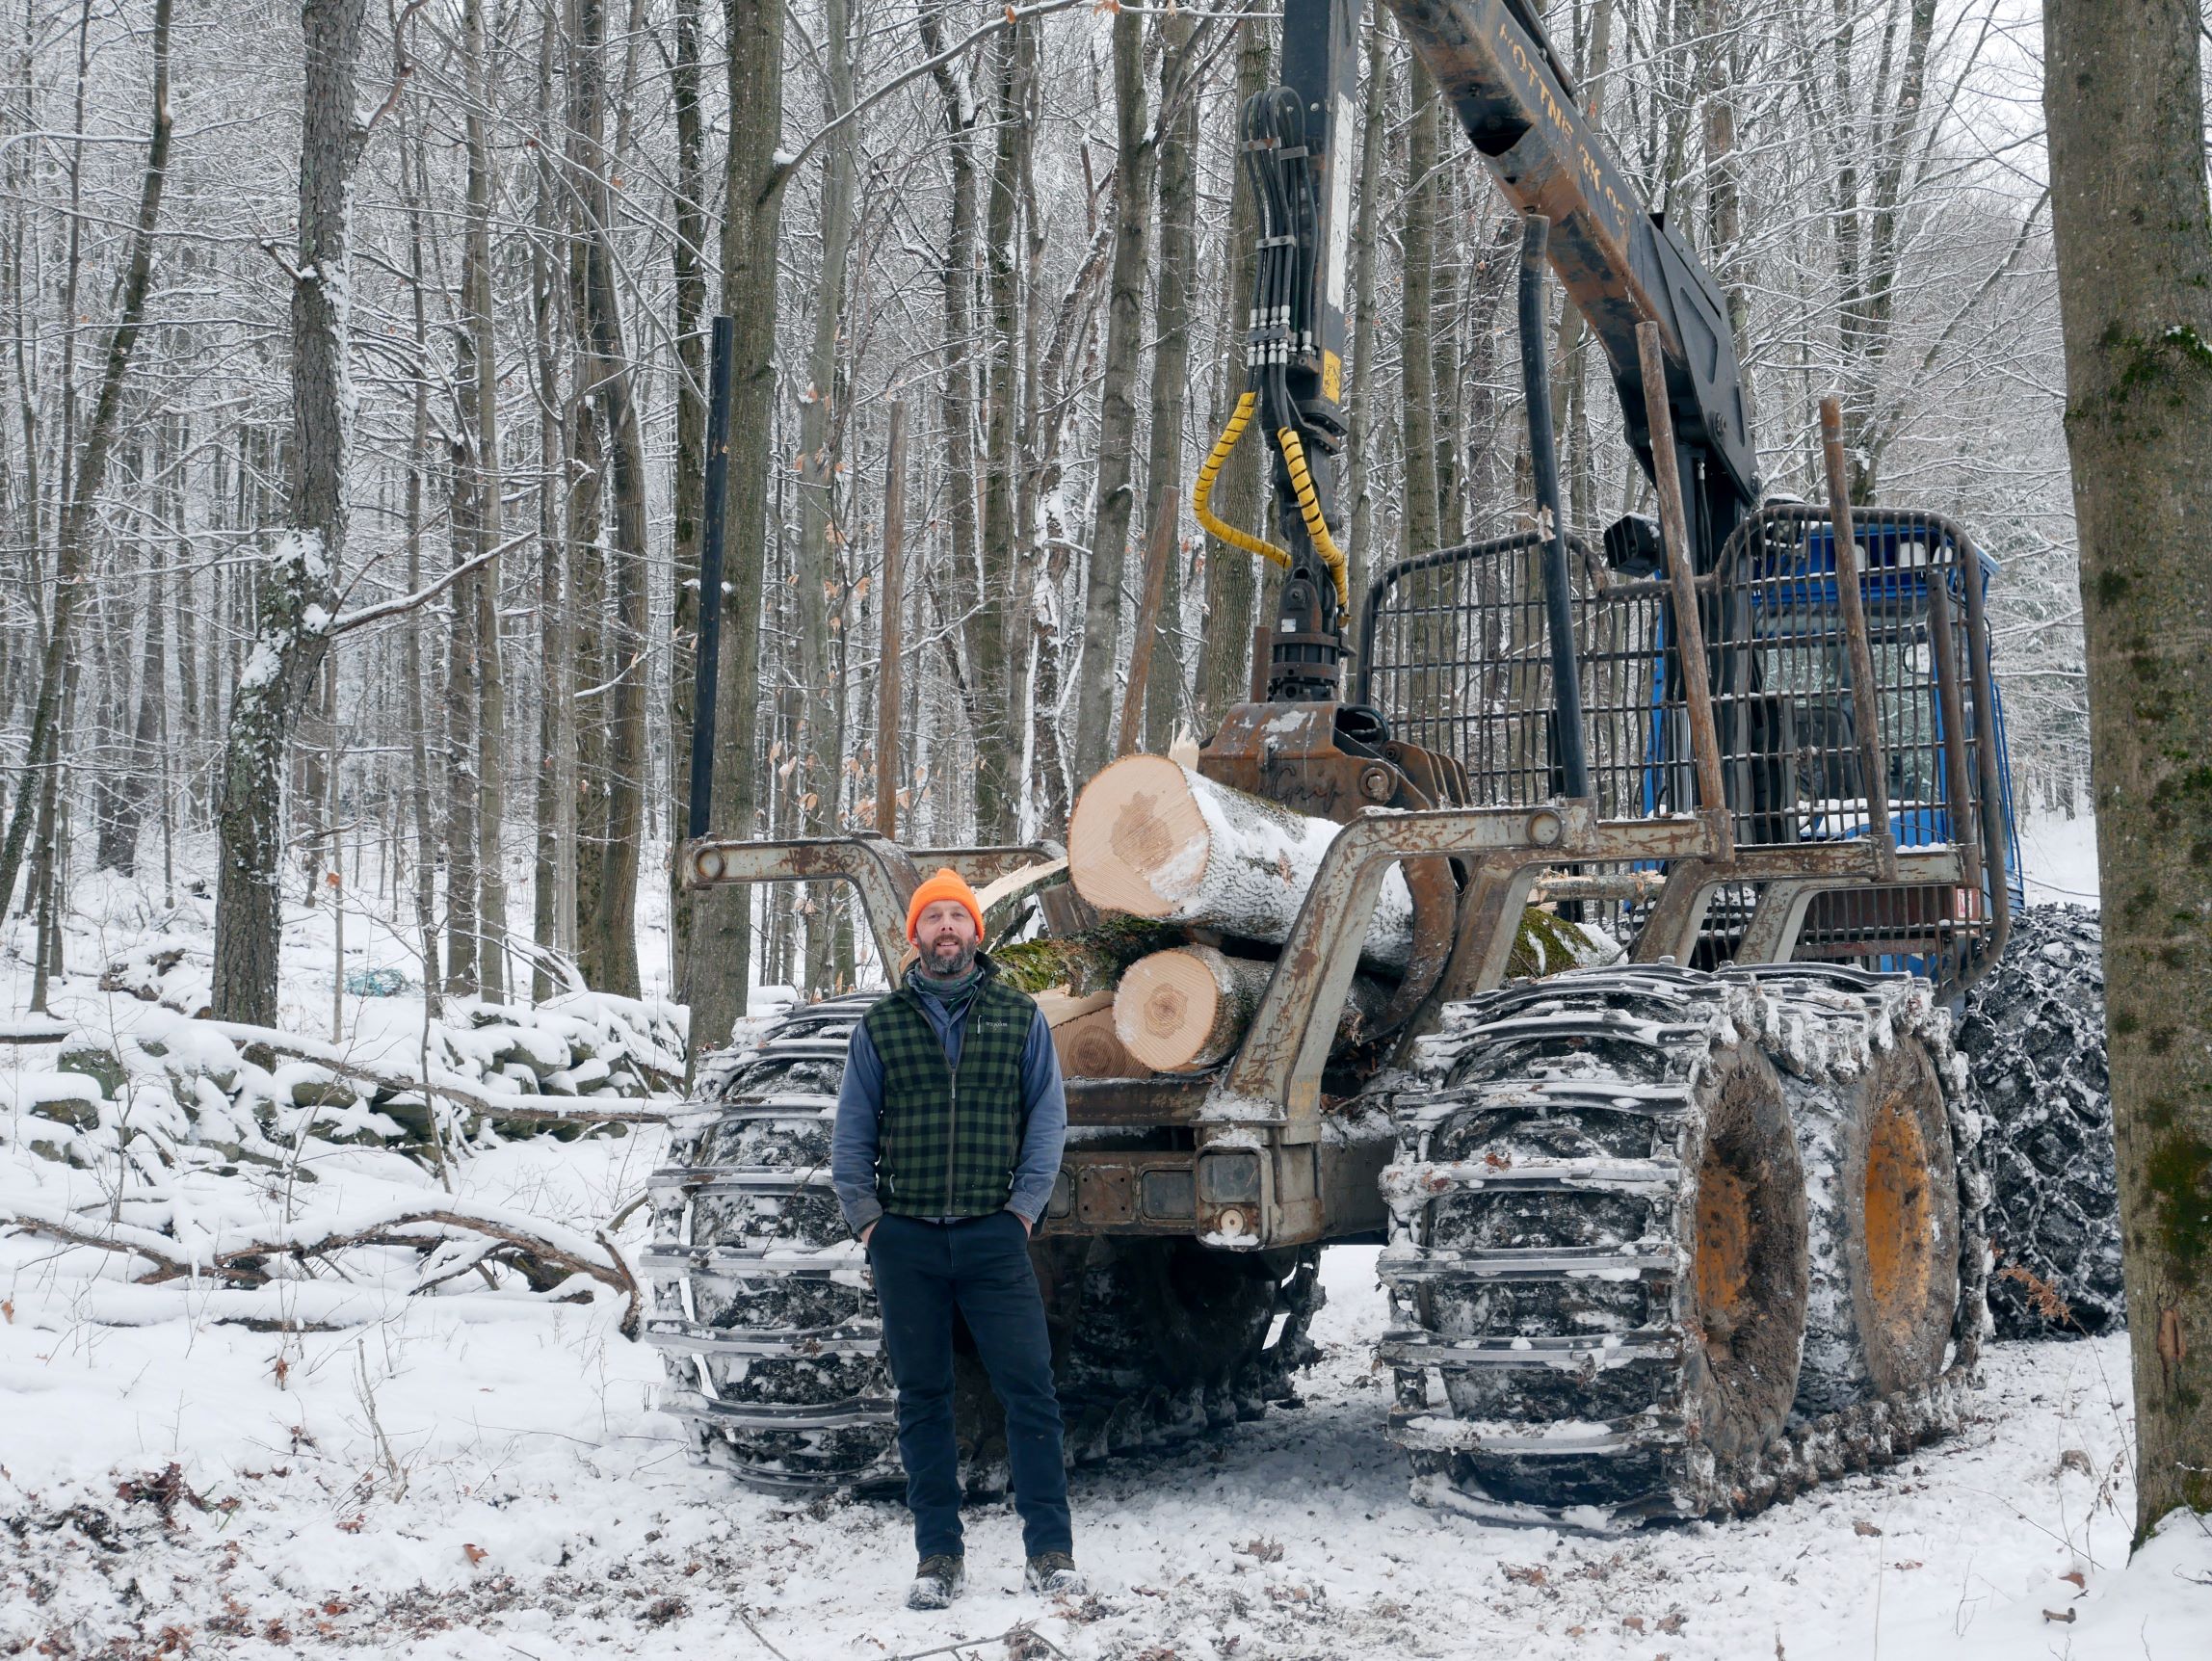 Logging forwarder in the winter with Ben standing in front of it wearing an orange hat